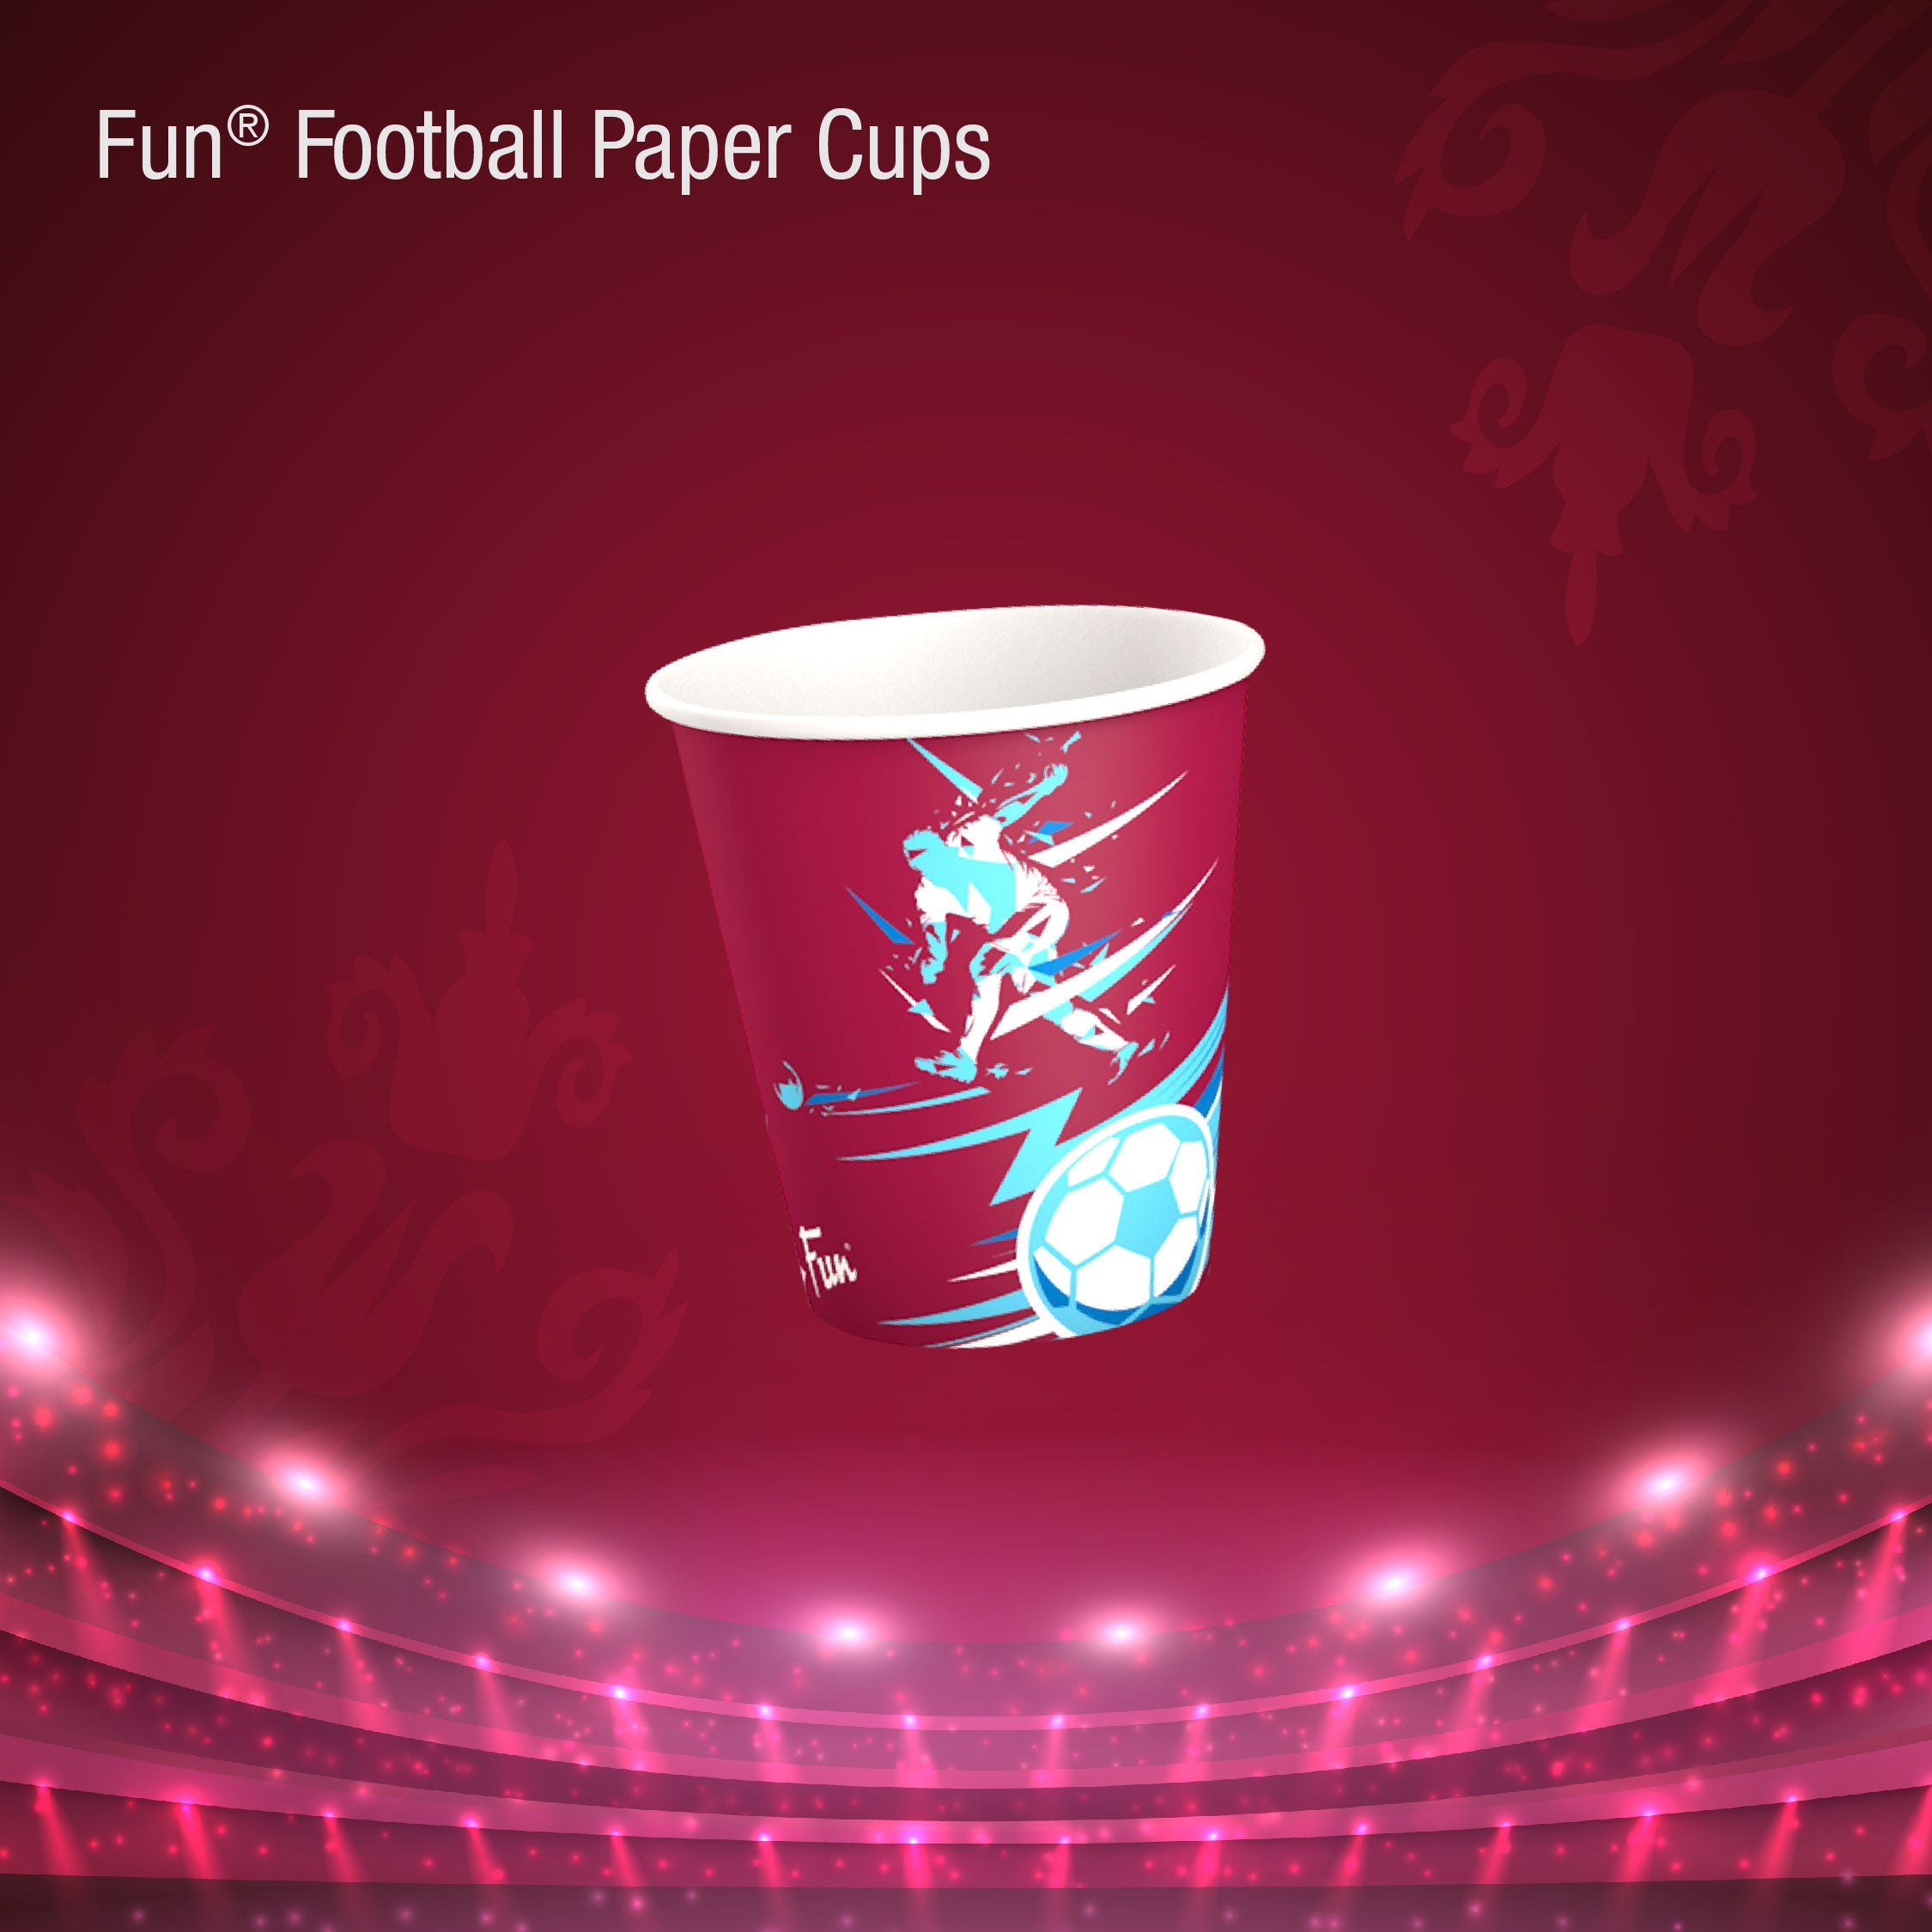 Fun Double Wall Paper Cup 8oz - Blue Football Design (Pack of 10)